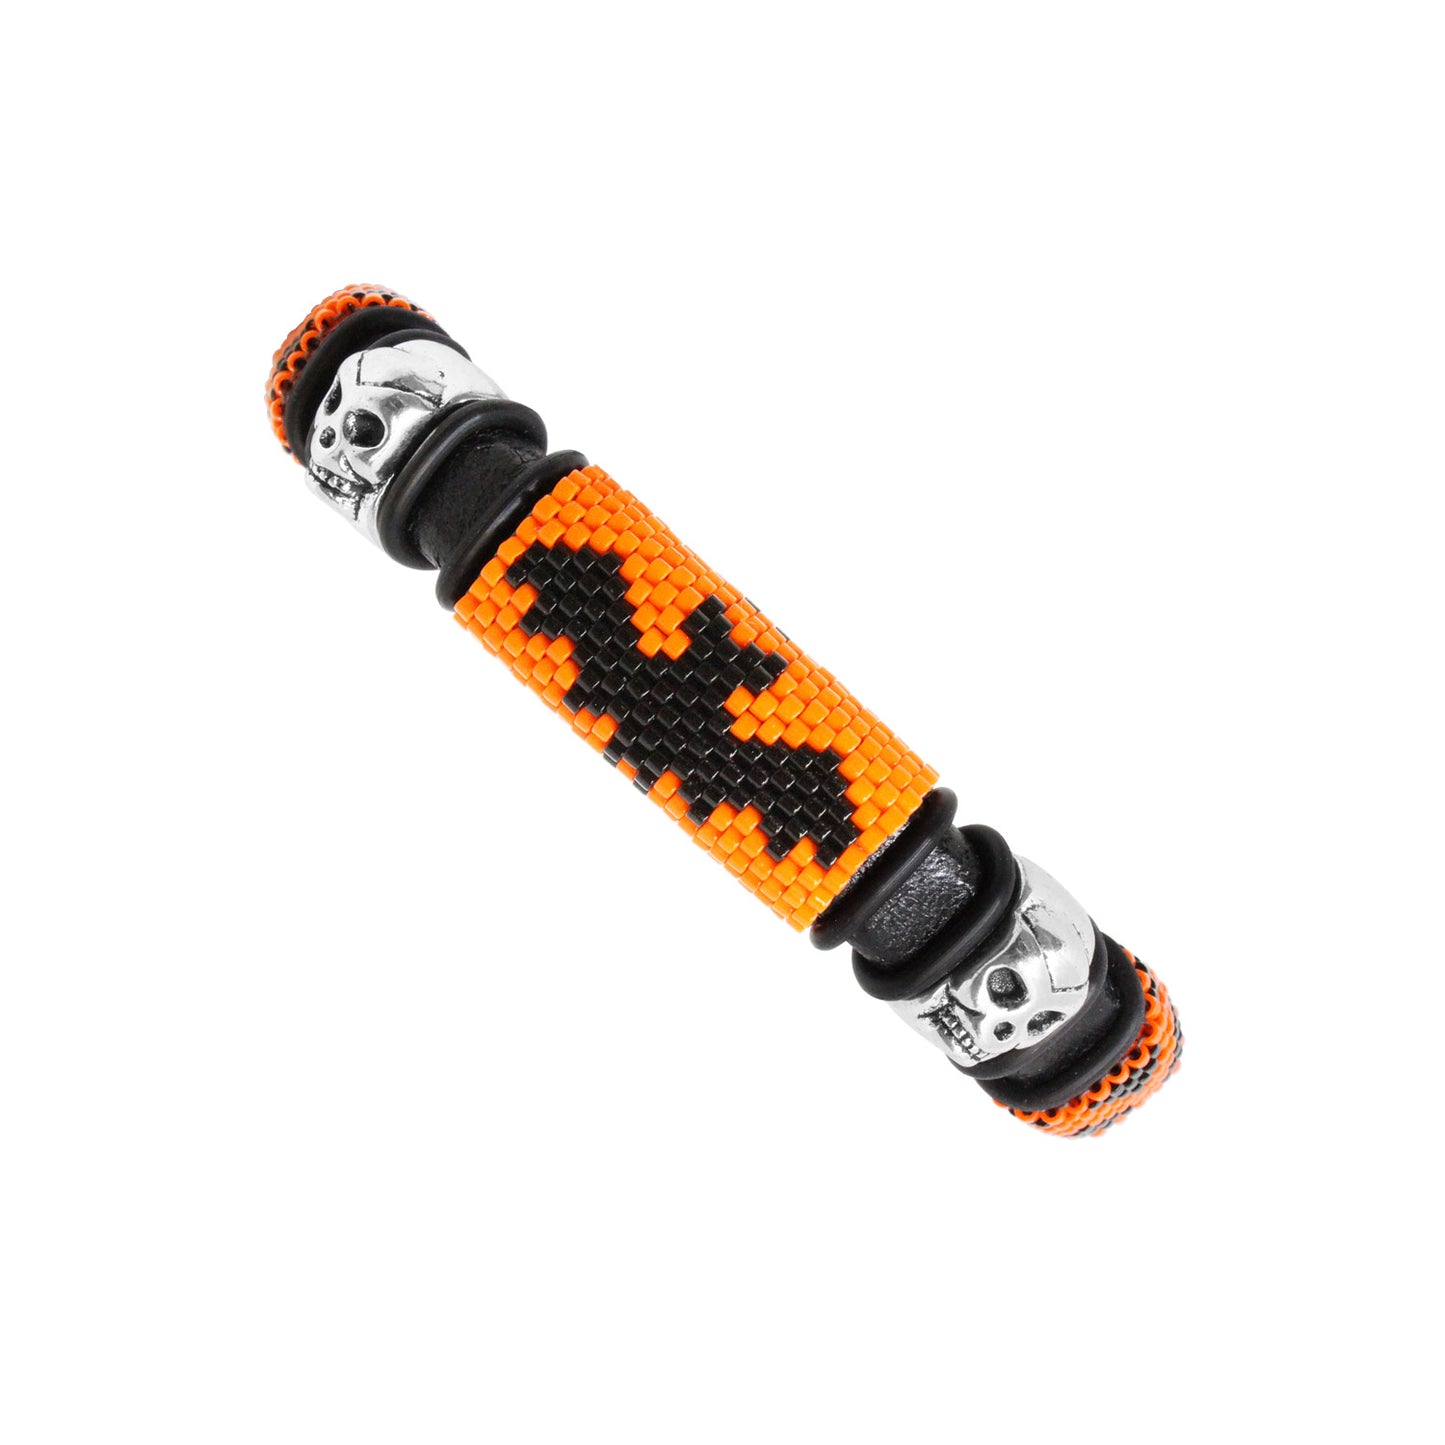 Scary Halloween Bracelet / fits 6.5 to 7 Inch wrist size / large bat with skulls / Euro leather cord / handmade peyote stitch sliders